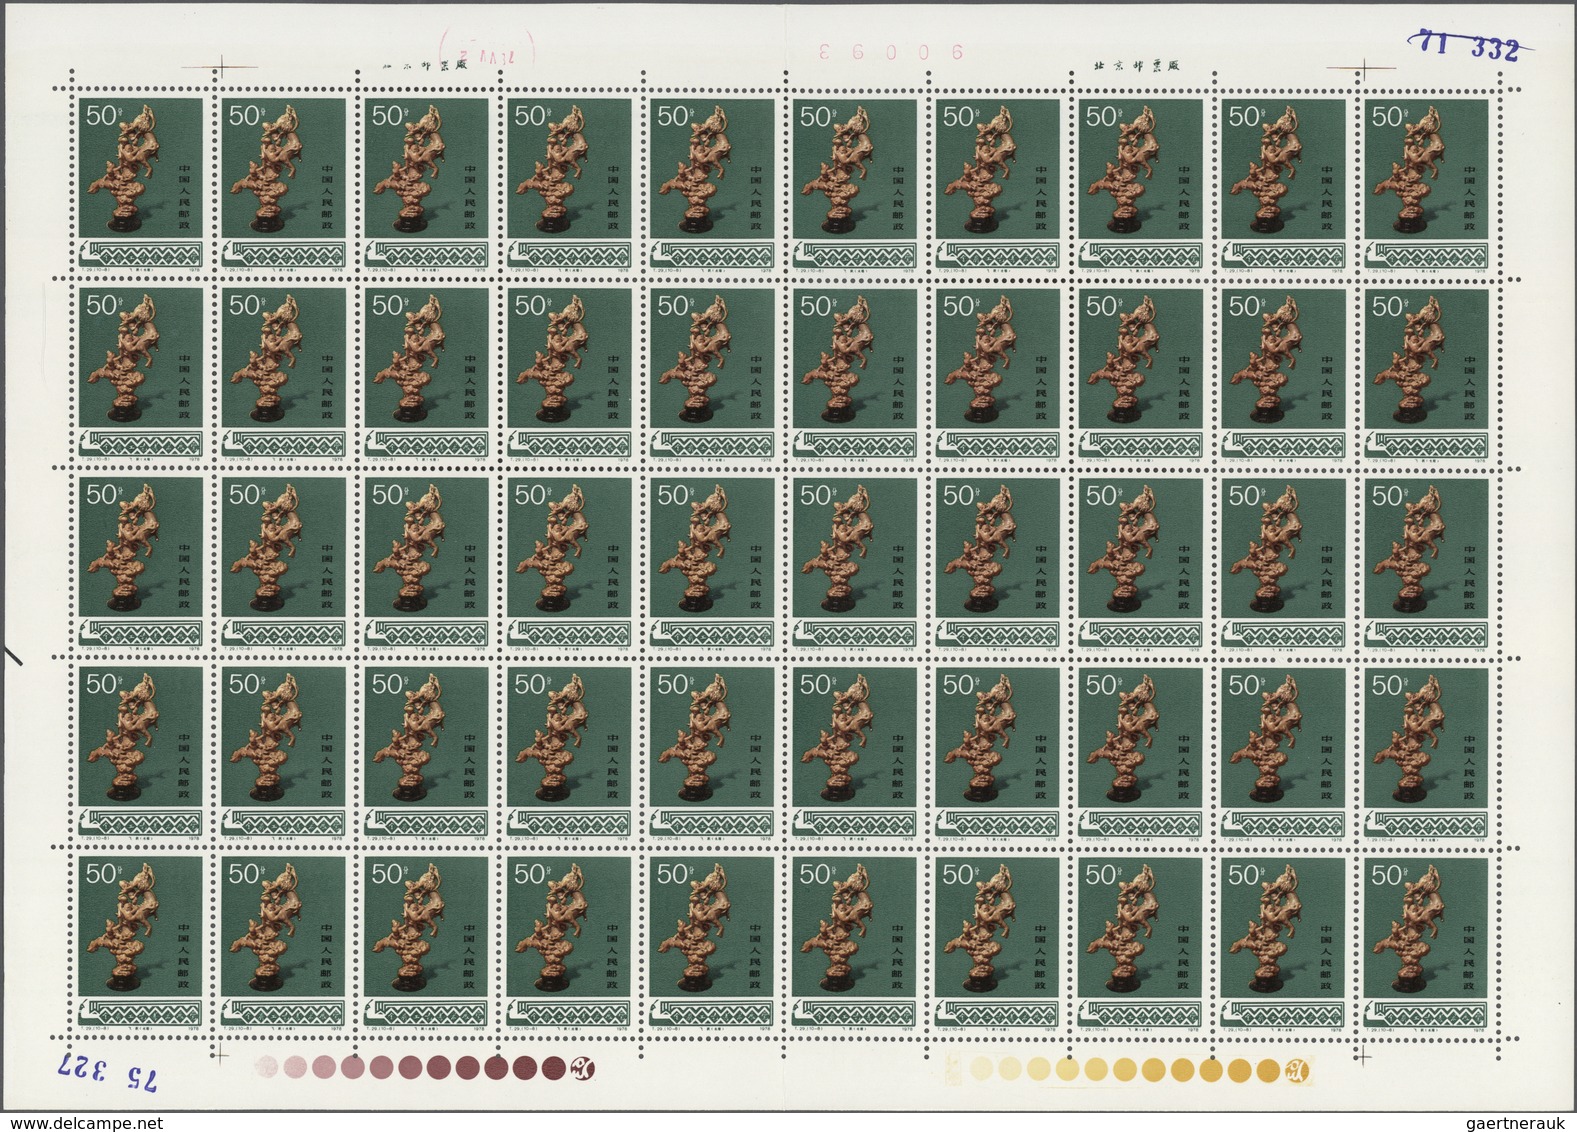 China - Volksrepublik: 1978, T29 Arts and Crafts, 50 complete sets of 10 on full sheets, all MNH, so